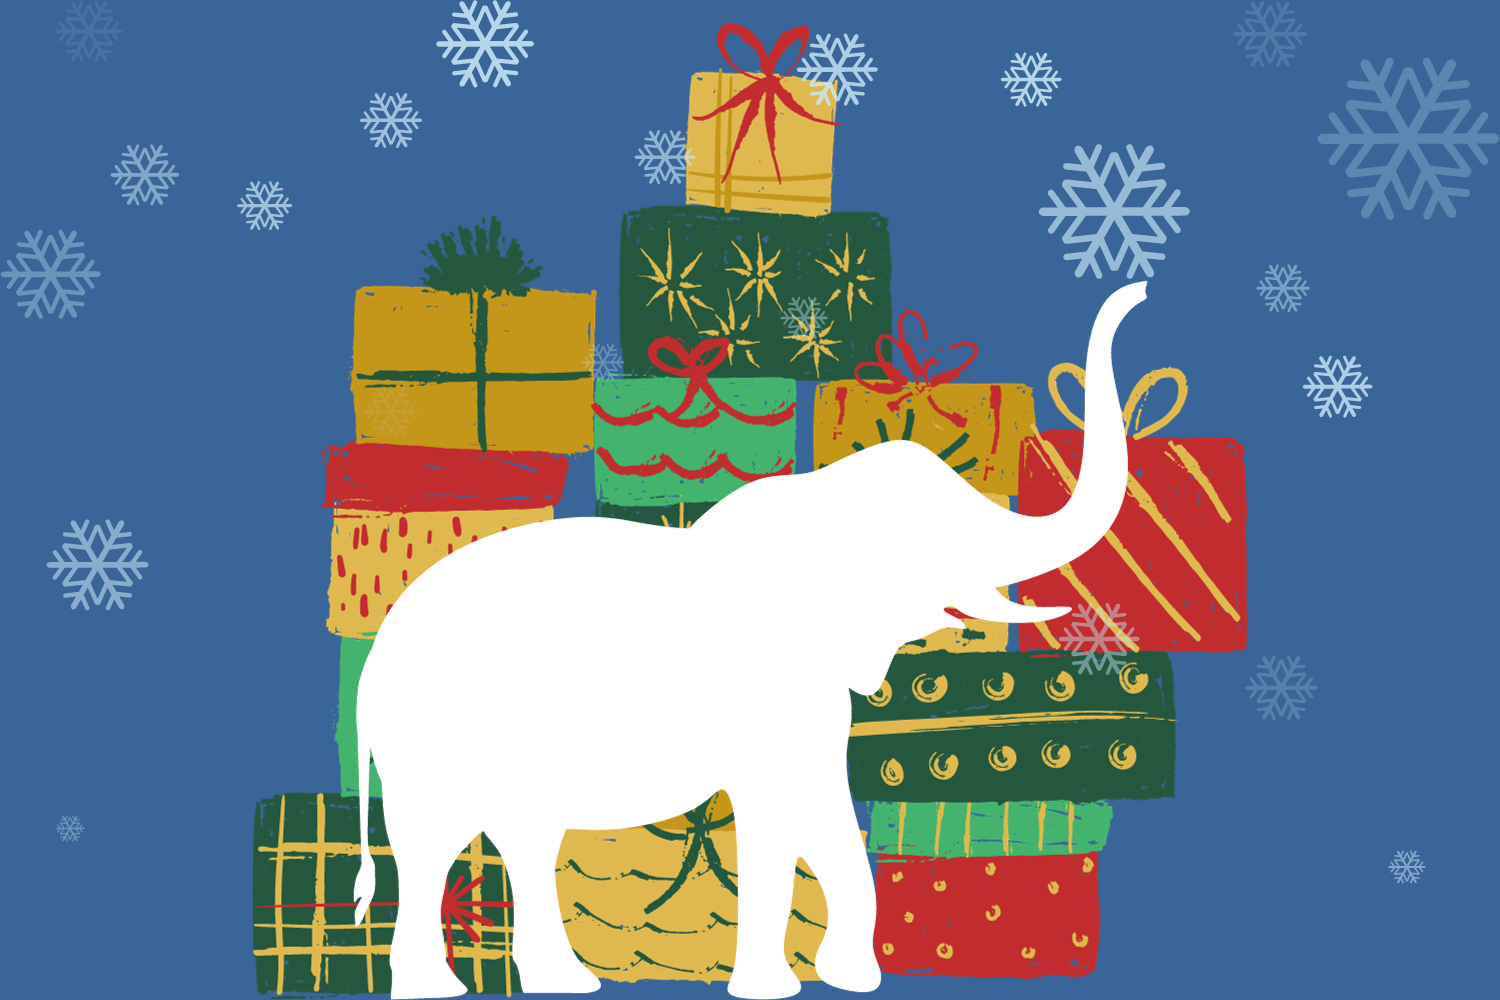 Best elephant gifts: 8 elephant-themed present ideas you can't